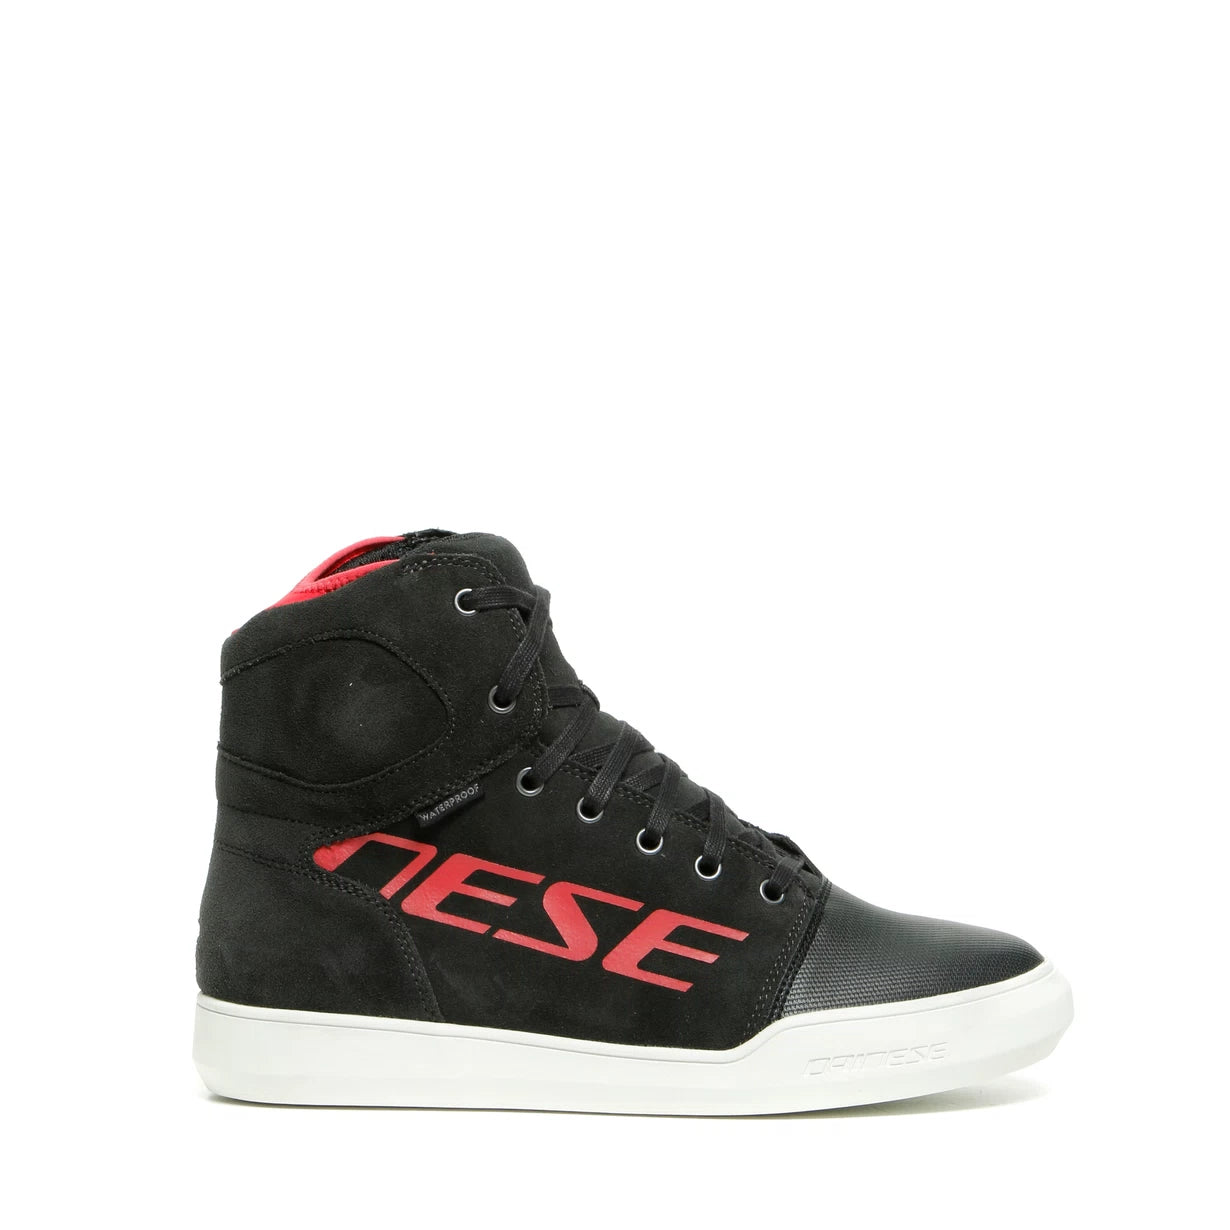 Dainese York D-WP Shoes Dainese